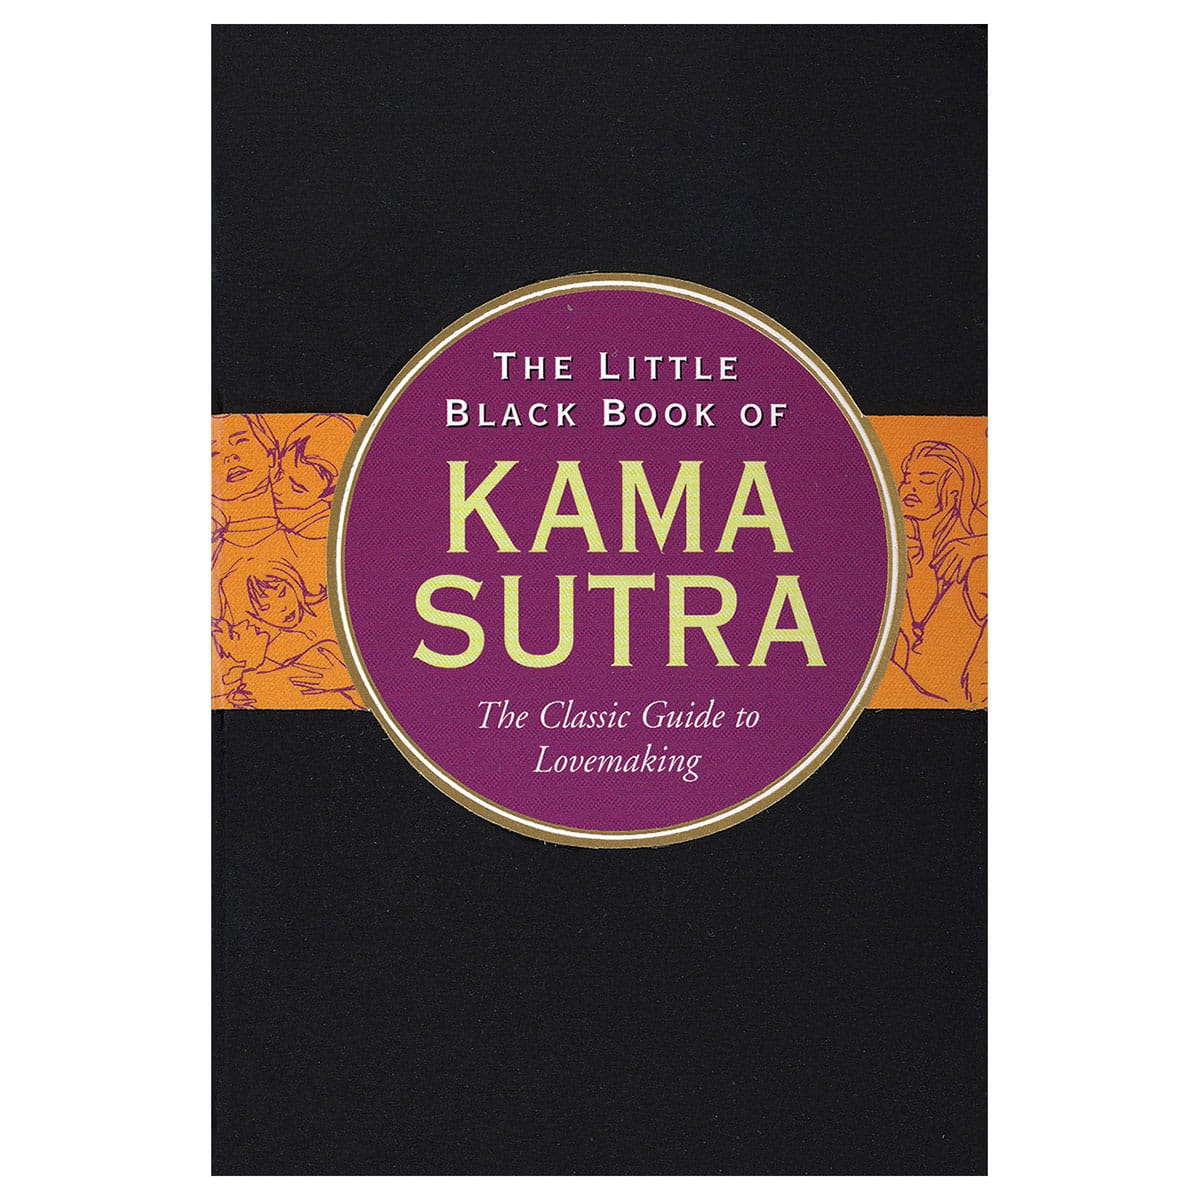 Buy The Classic Guide to Lovemaking Little Black Book of Kama Sutra book for her.